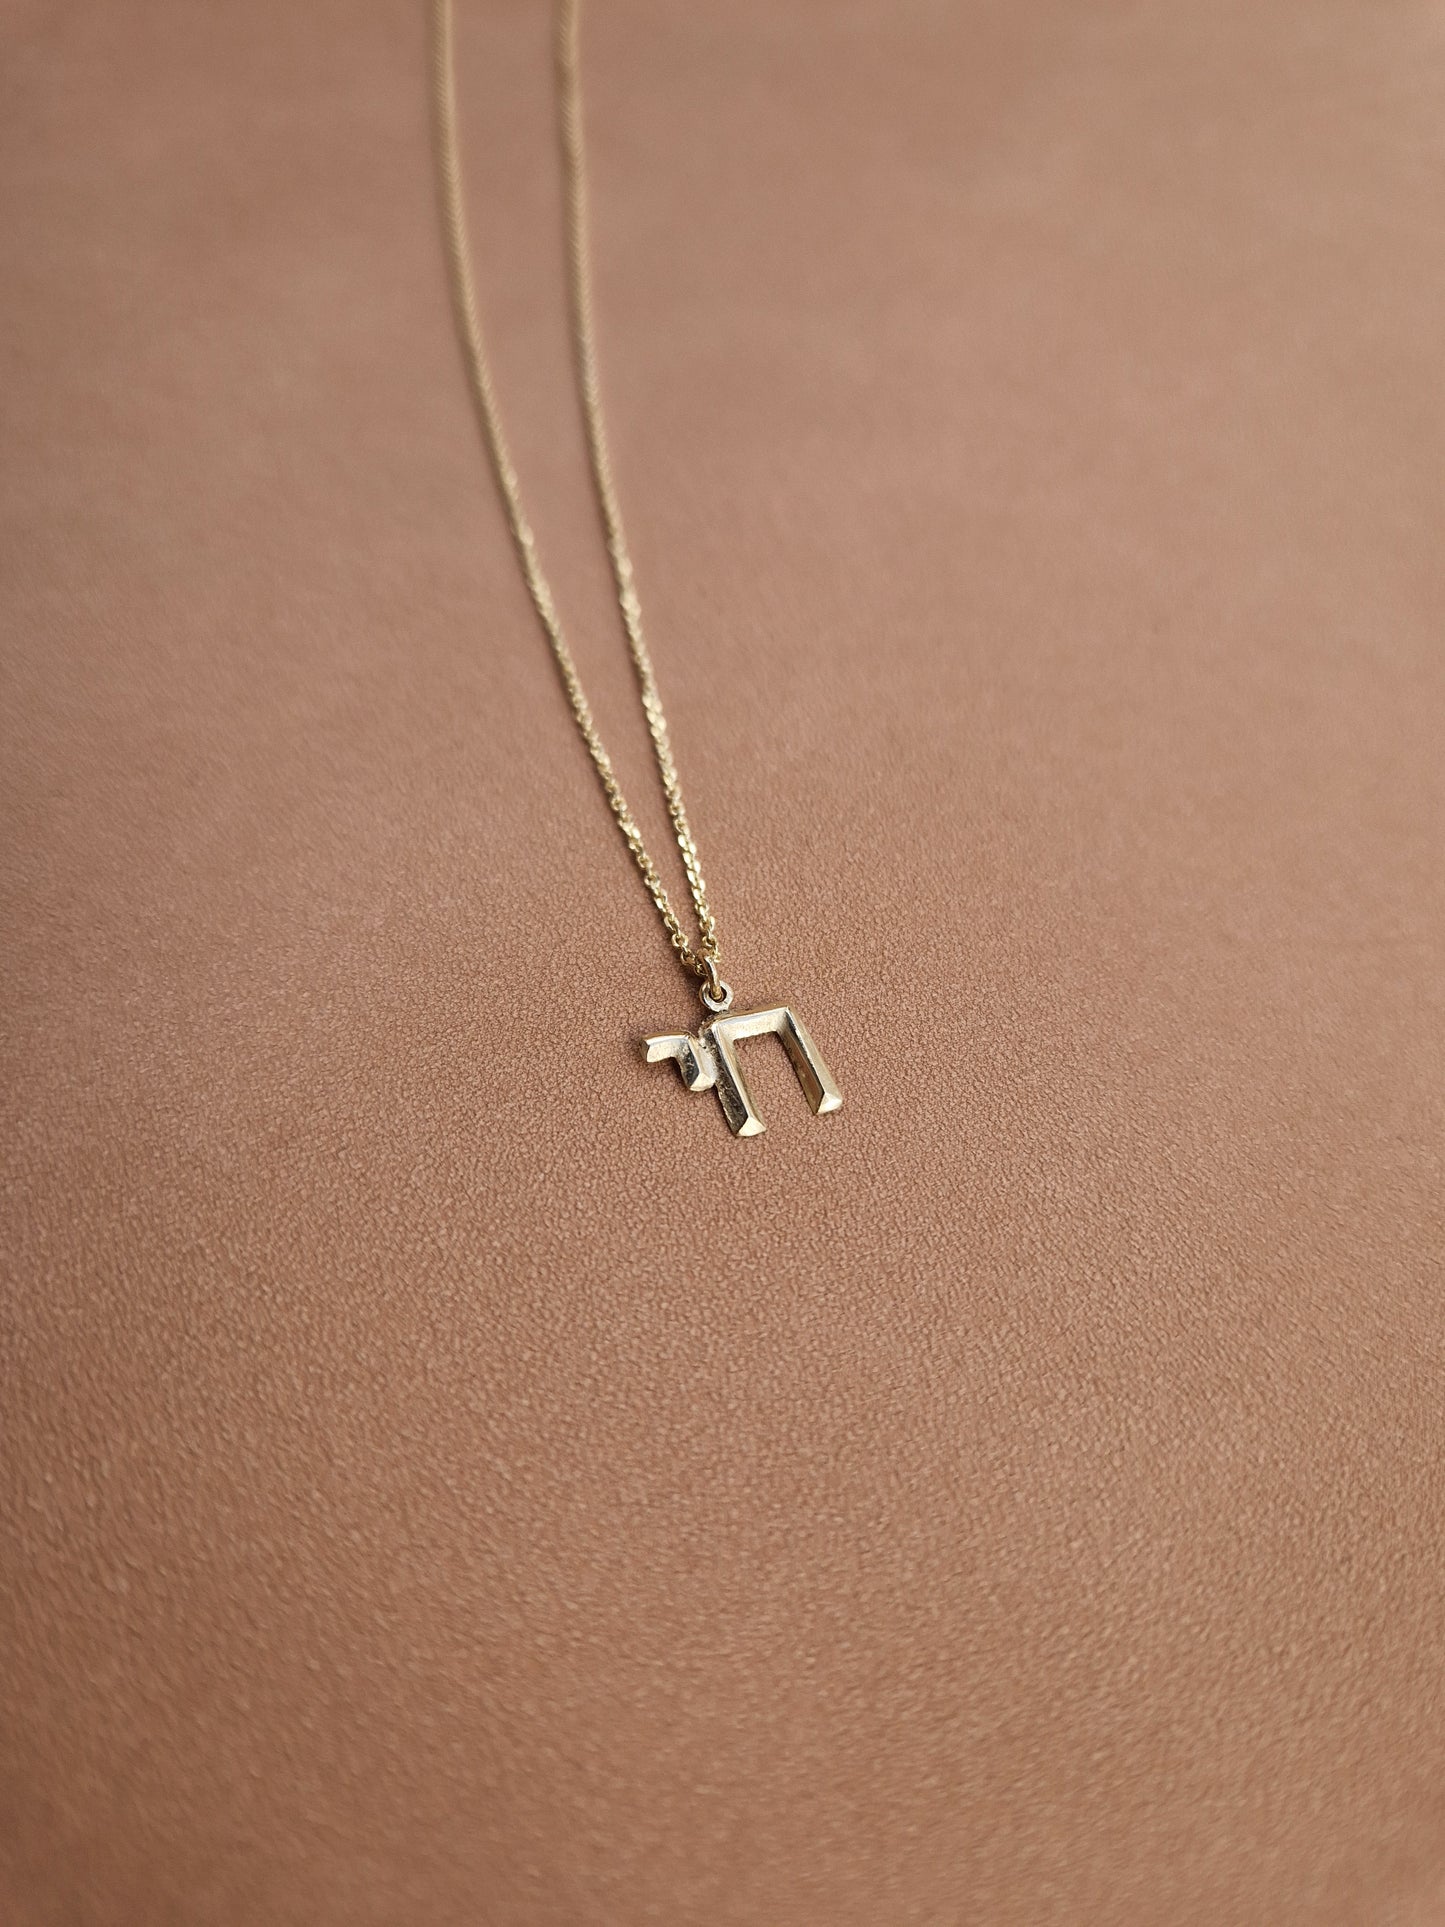 Chai Necklace in 14k